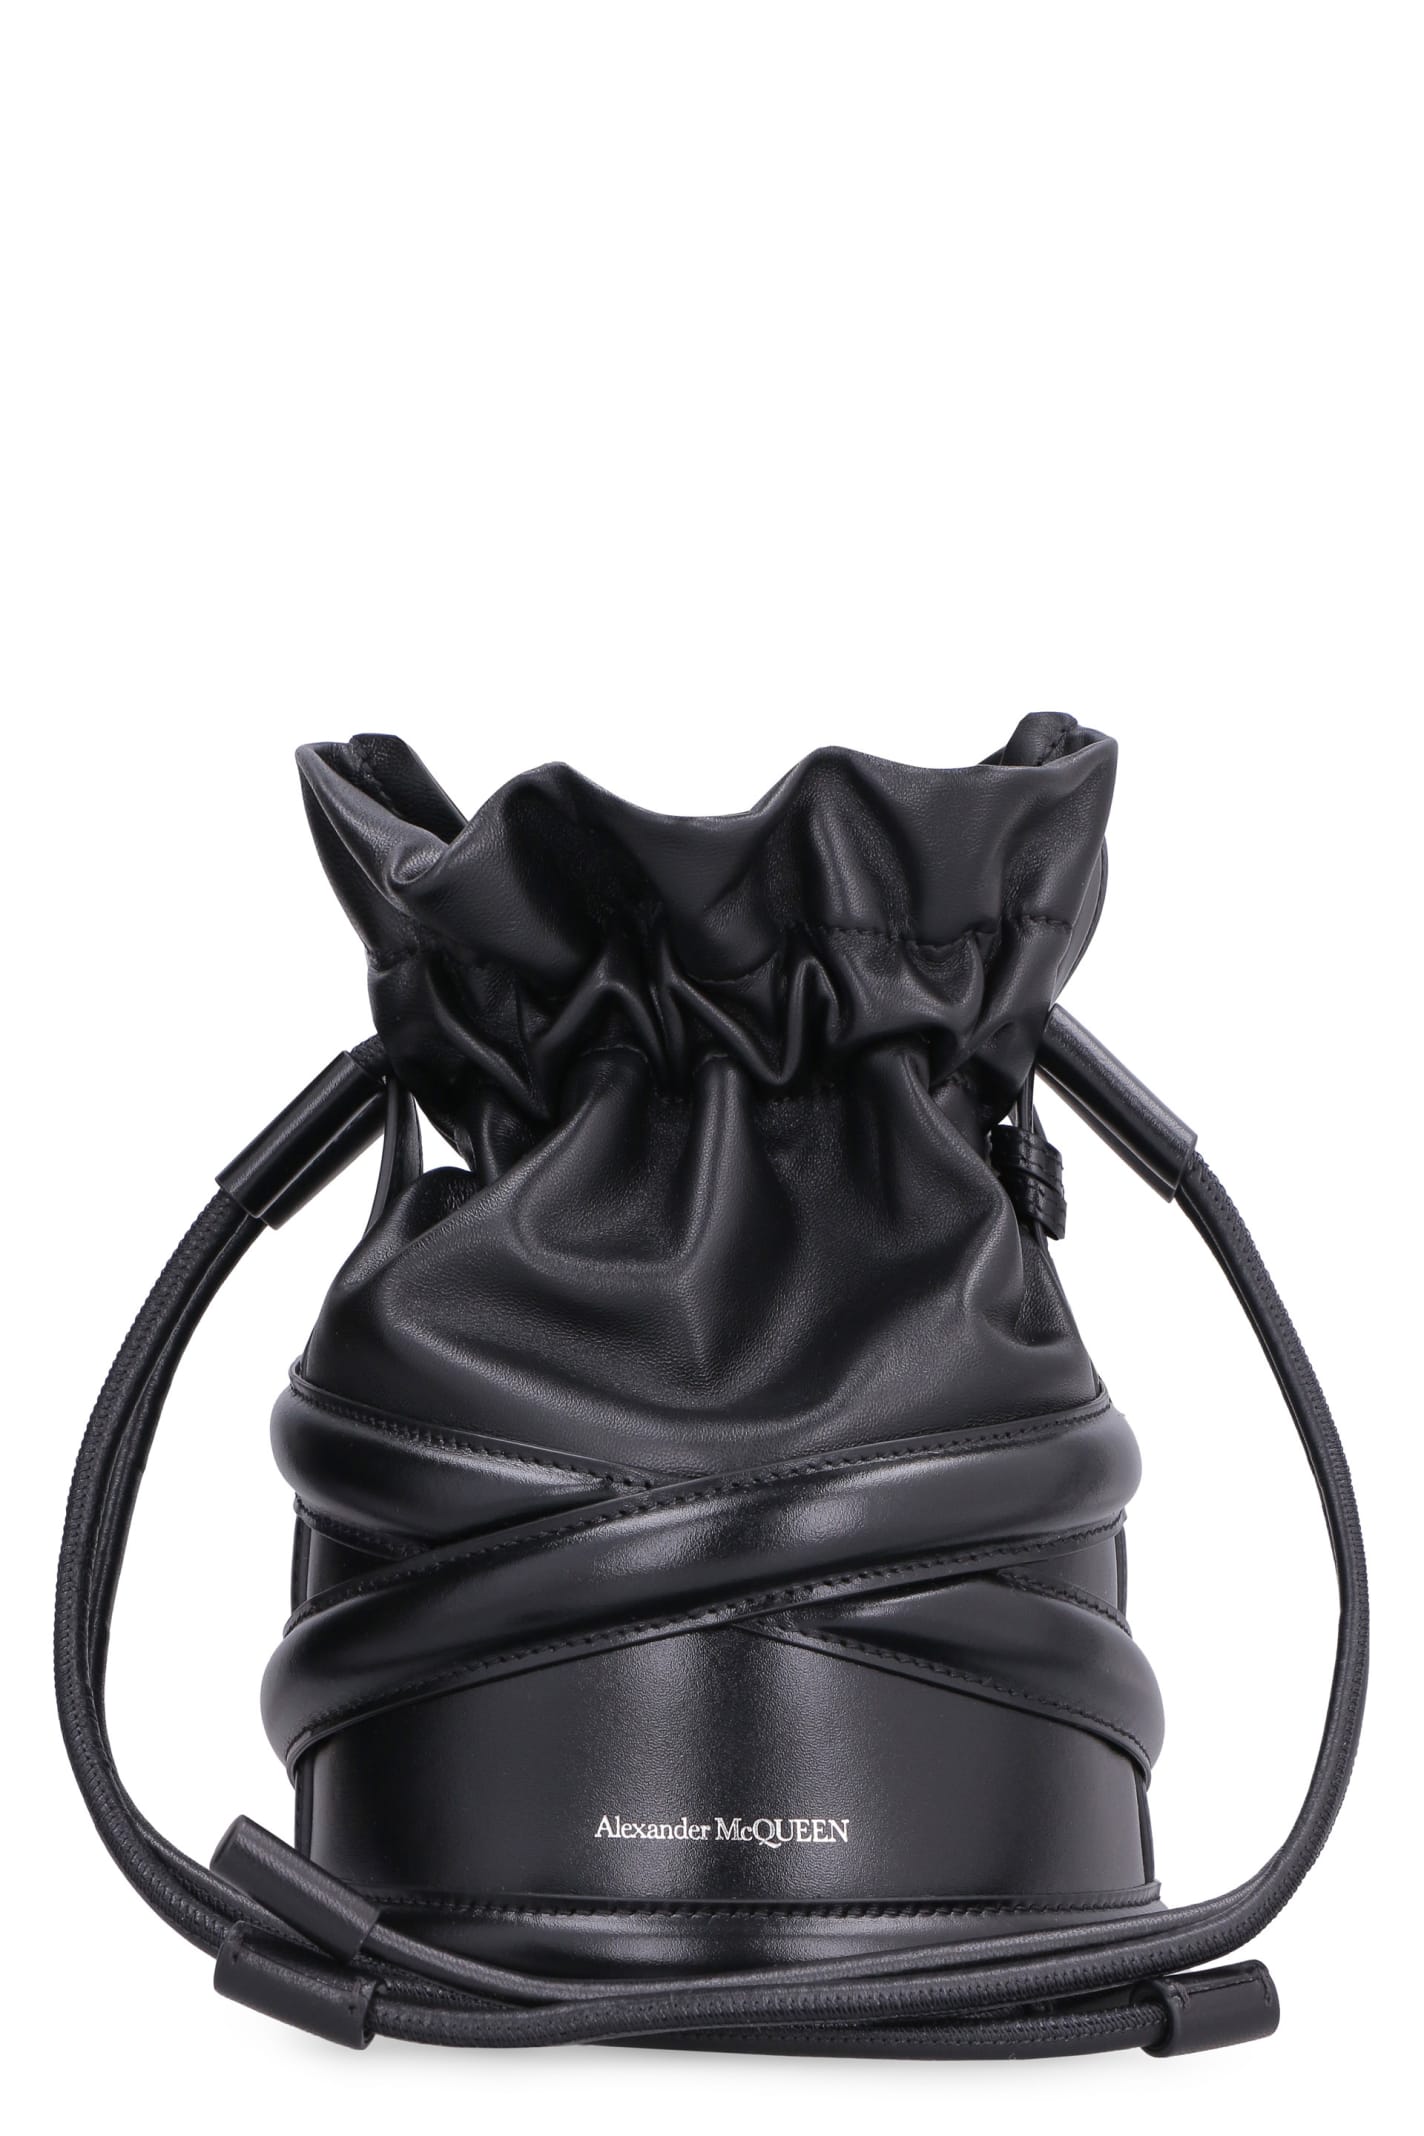 Alexander McQueen The Soft Curve Leather Bucket Bag